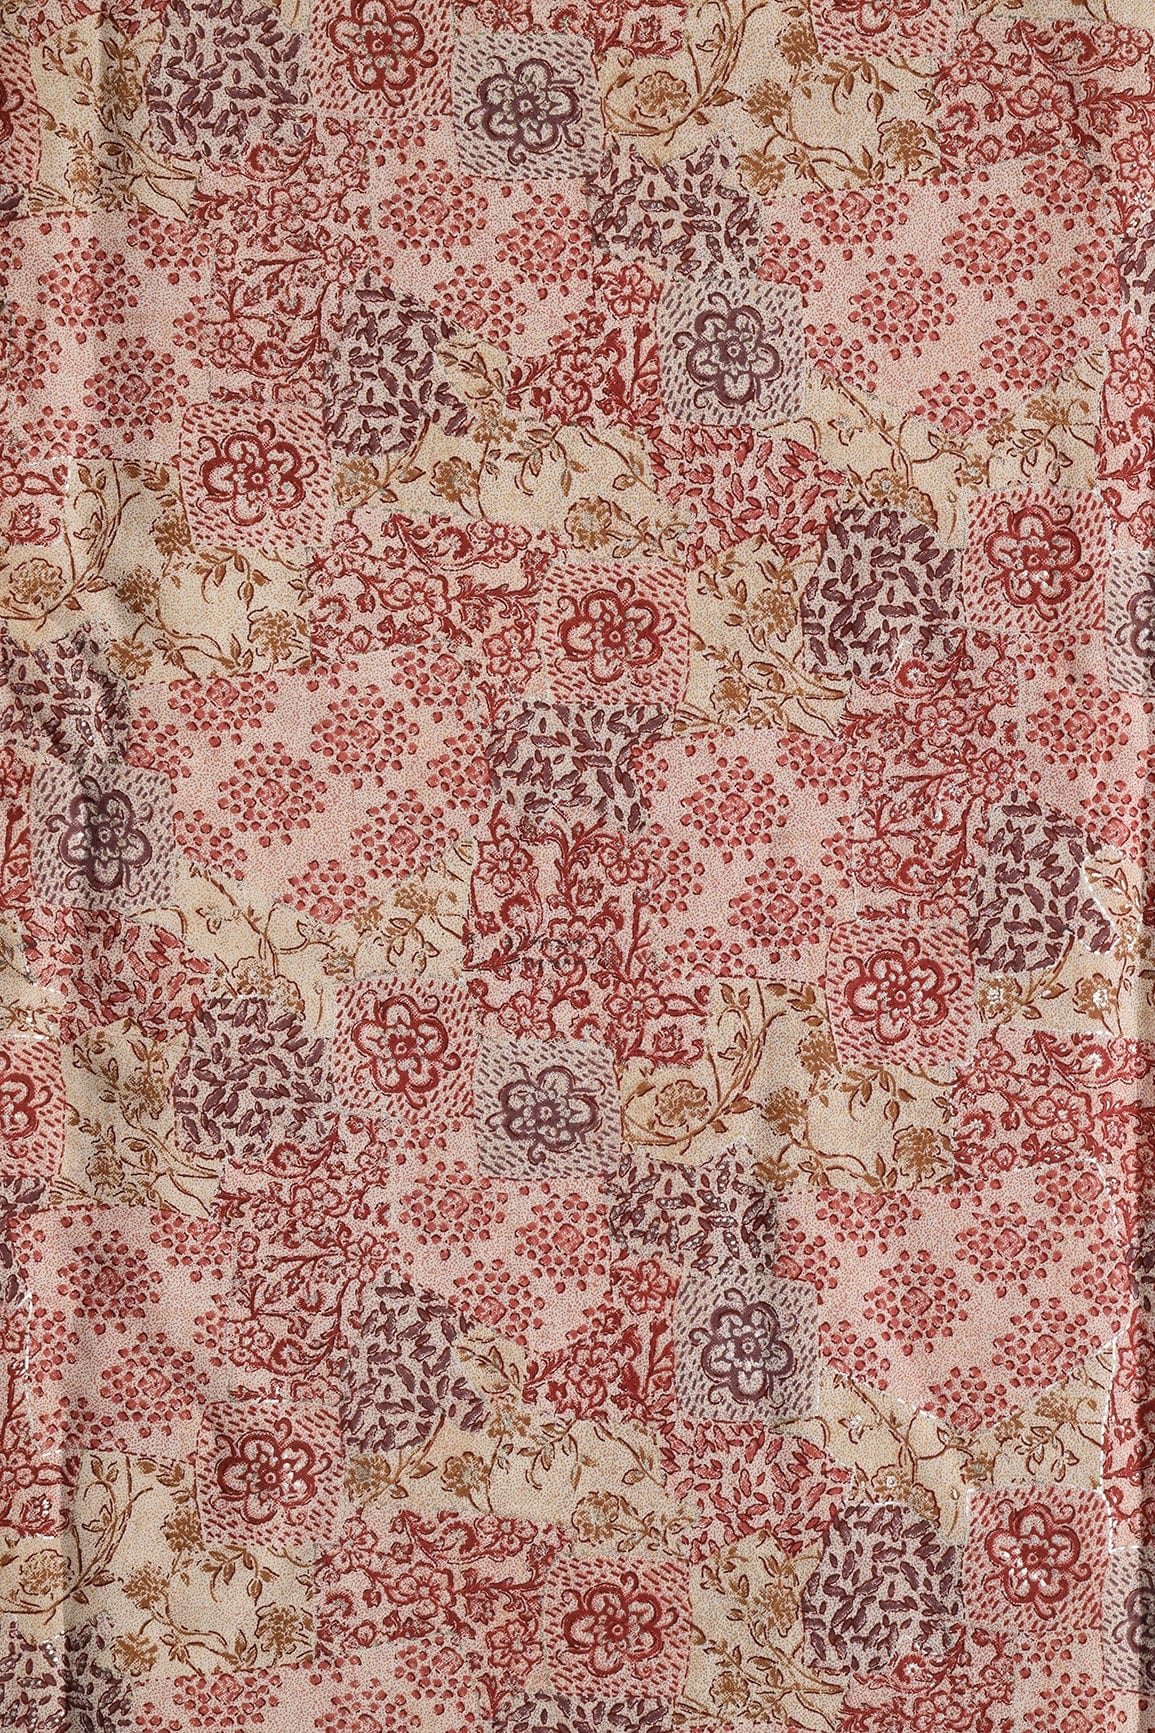 doeraa Prints Brown And Beige Floral Foil Print On Pure Chanderi Silk Fabric